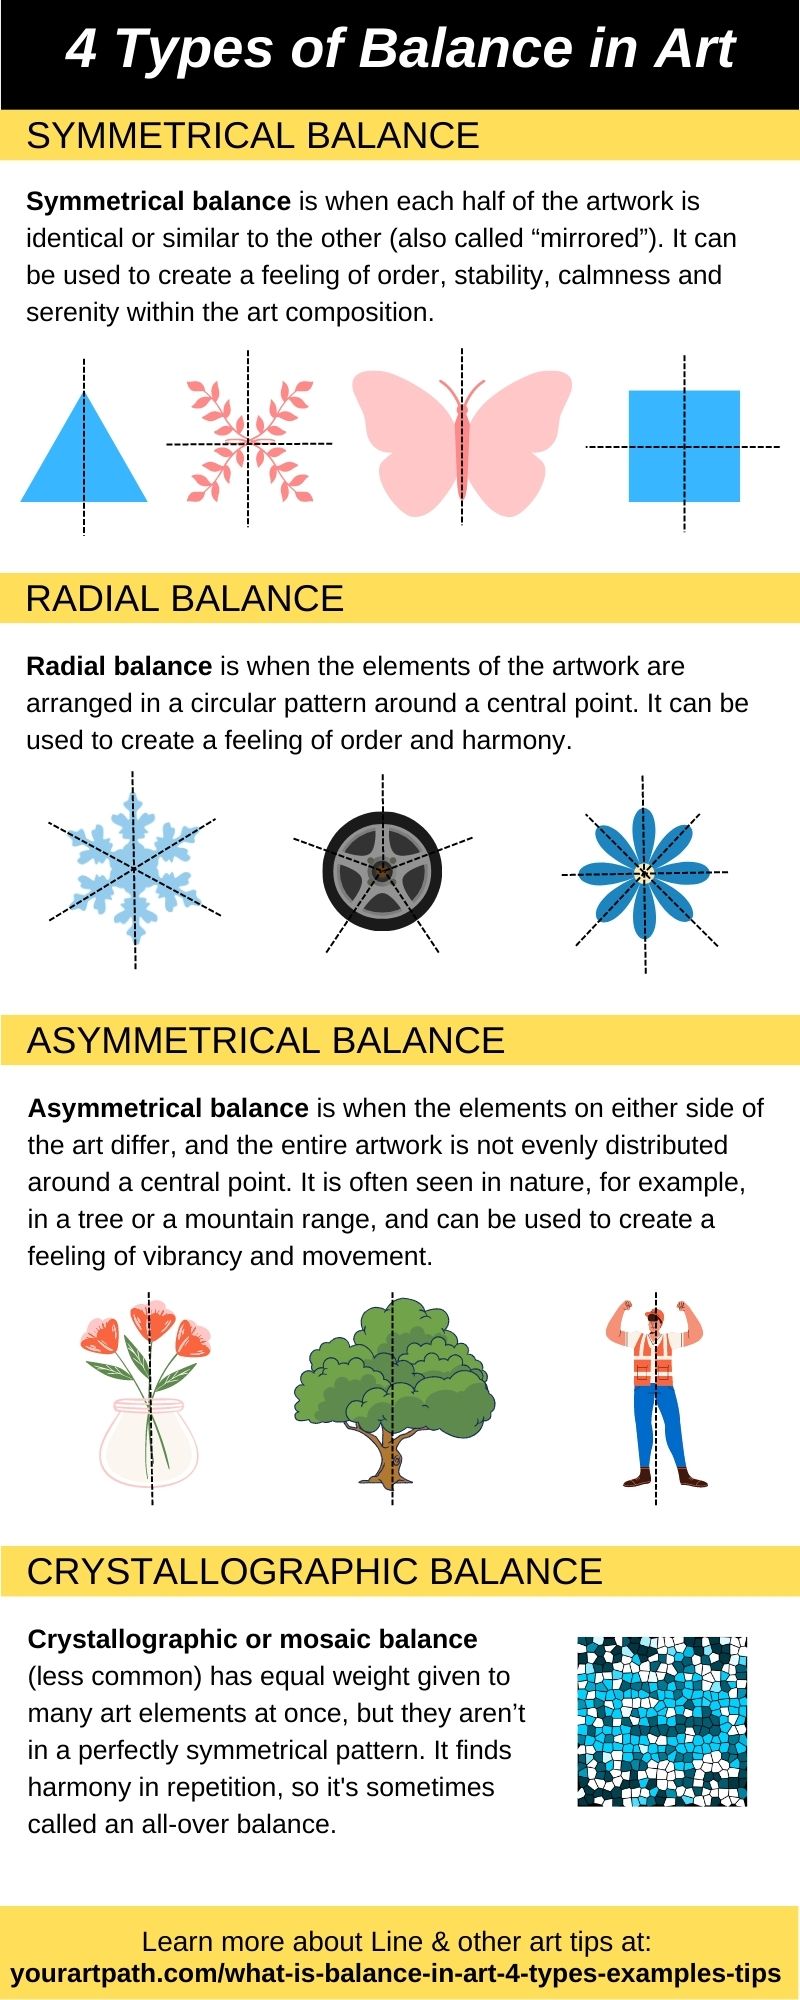 4 types of balance in art - Infographic with definitions and examples